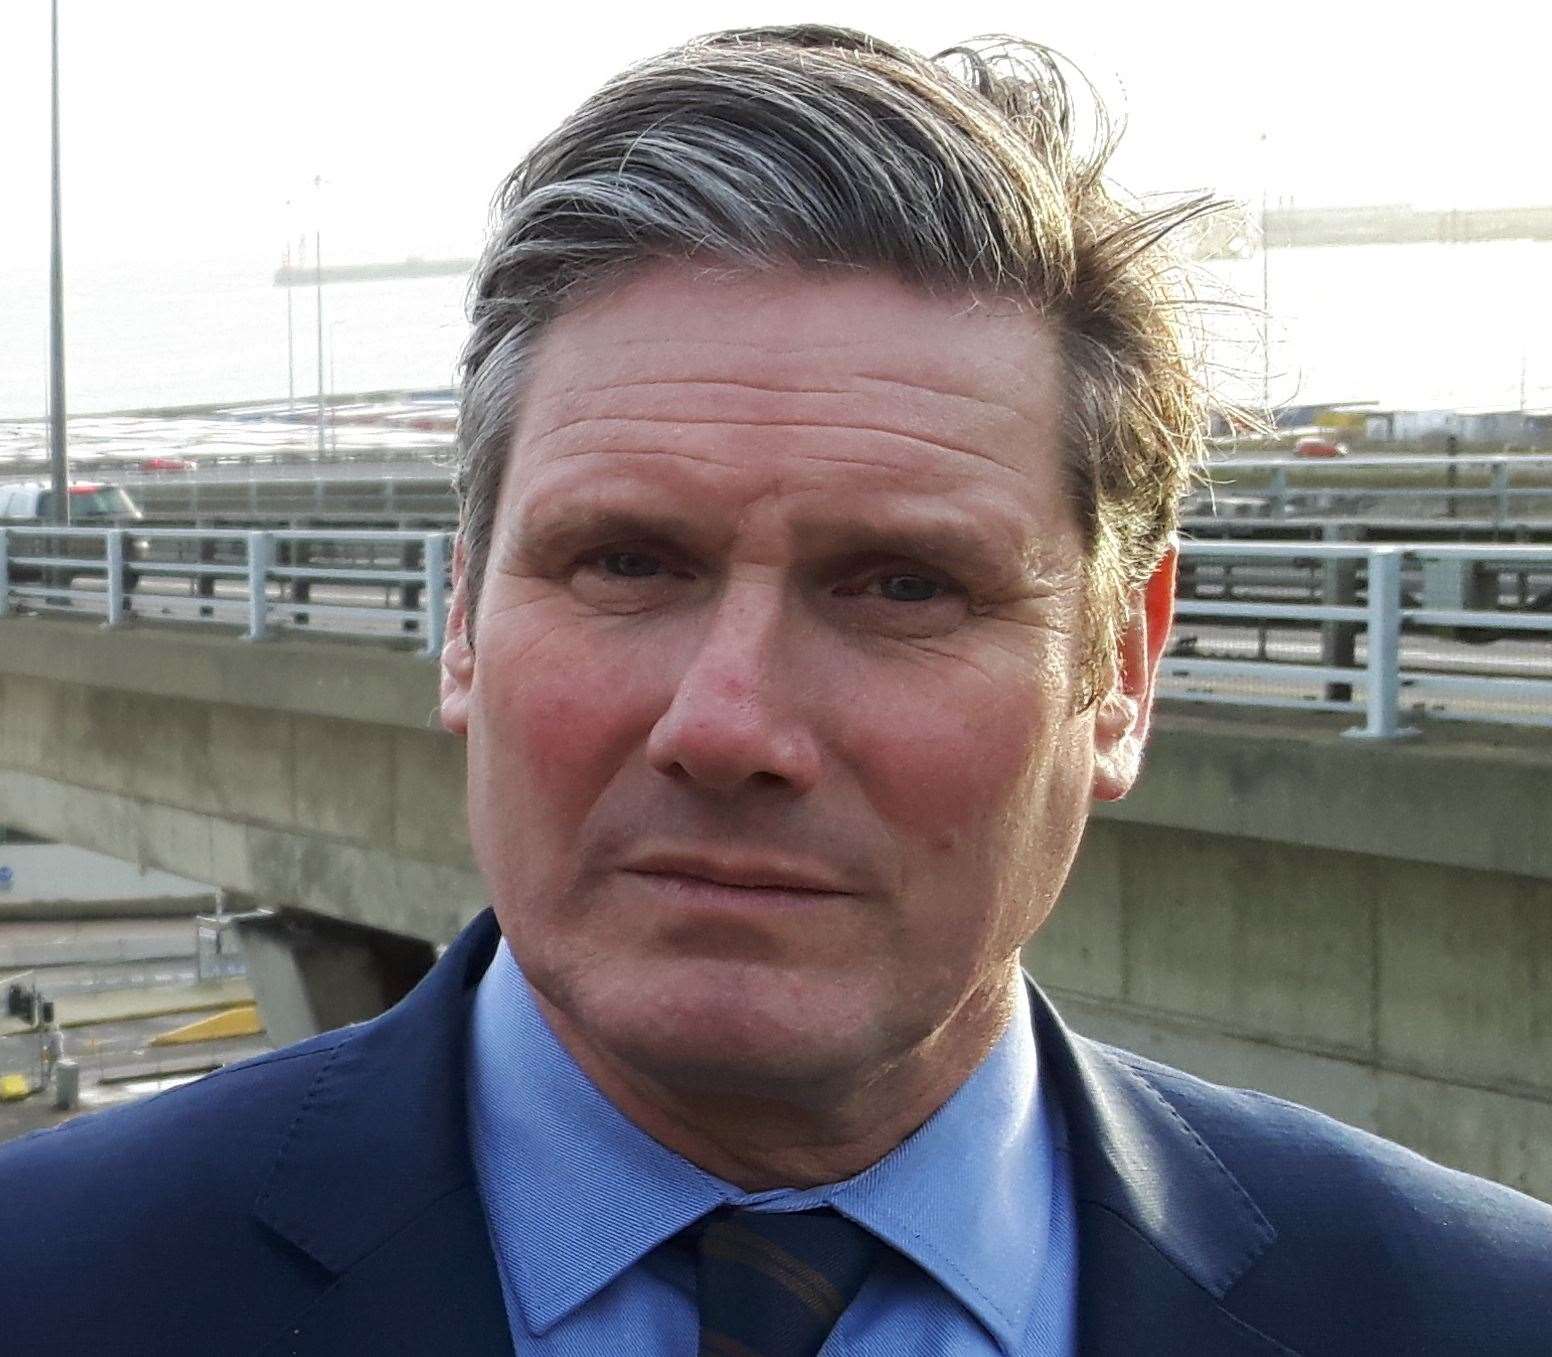 The unauthorised tweet about Labour leader Keir Starmer has been widely mocked online. Stock image